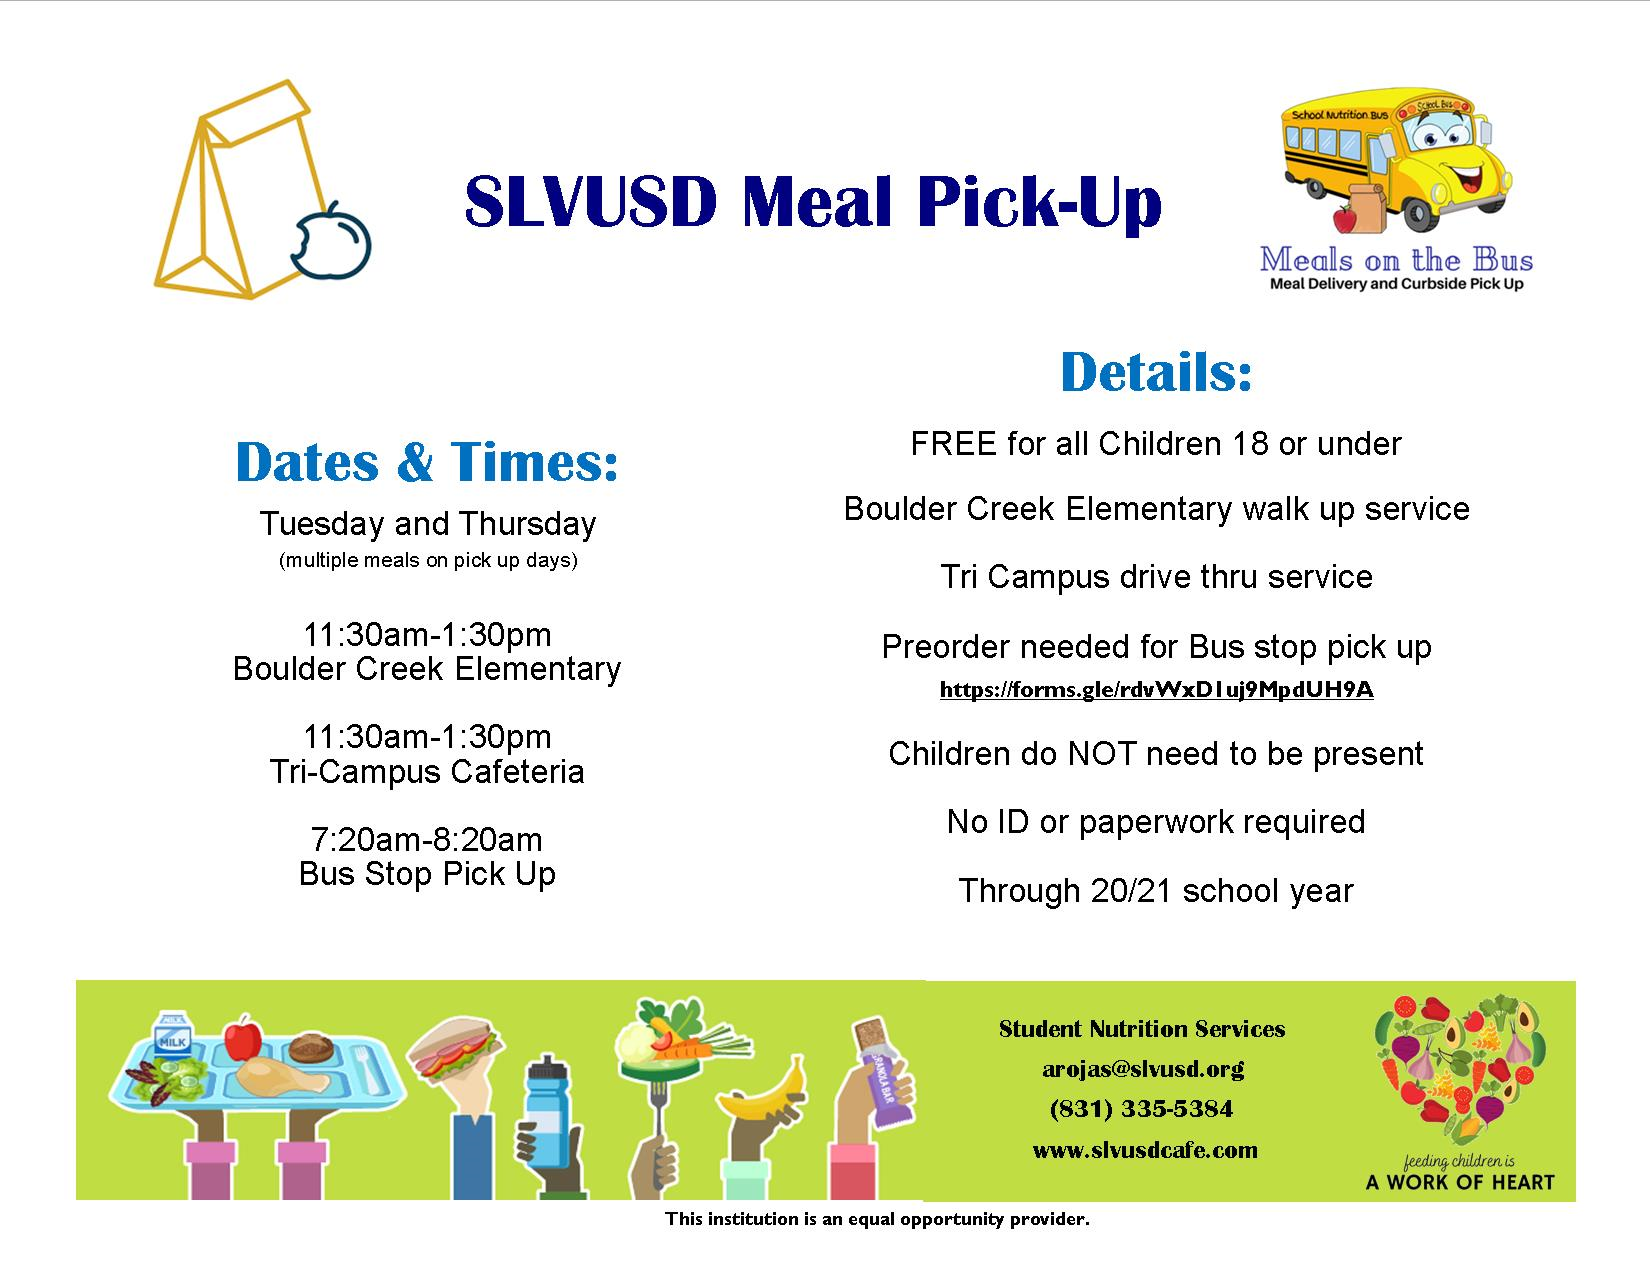 SLVUSD meal pick-up; call 831-335-5384 for details